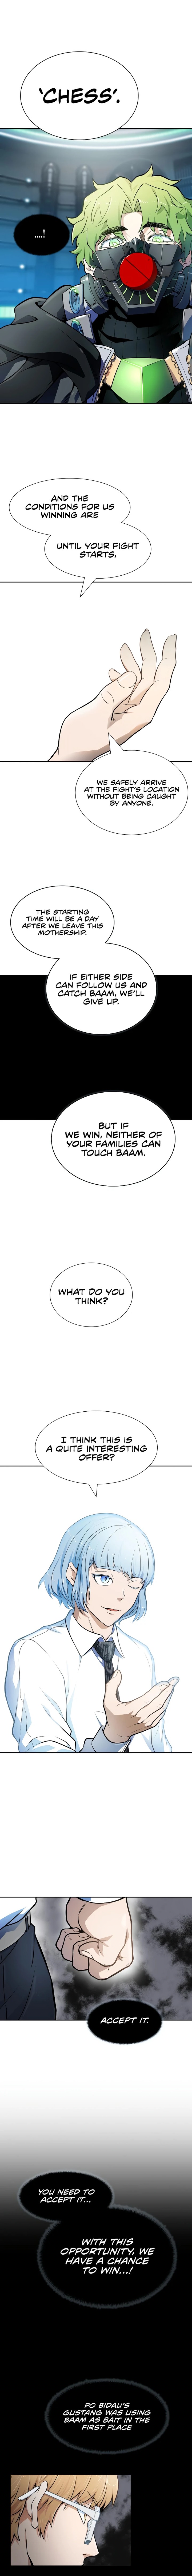 Tower Of God Chapter 575 Page 16